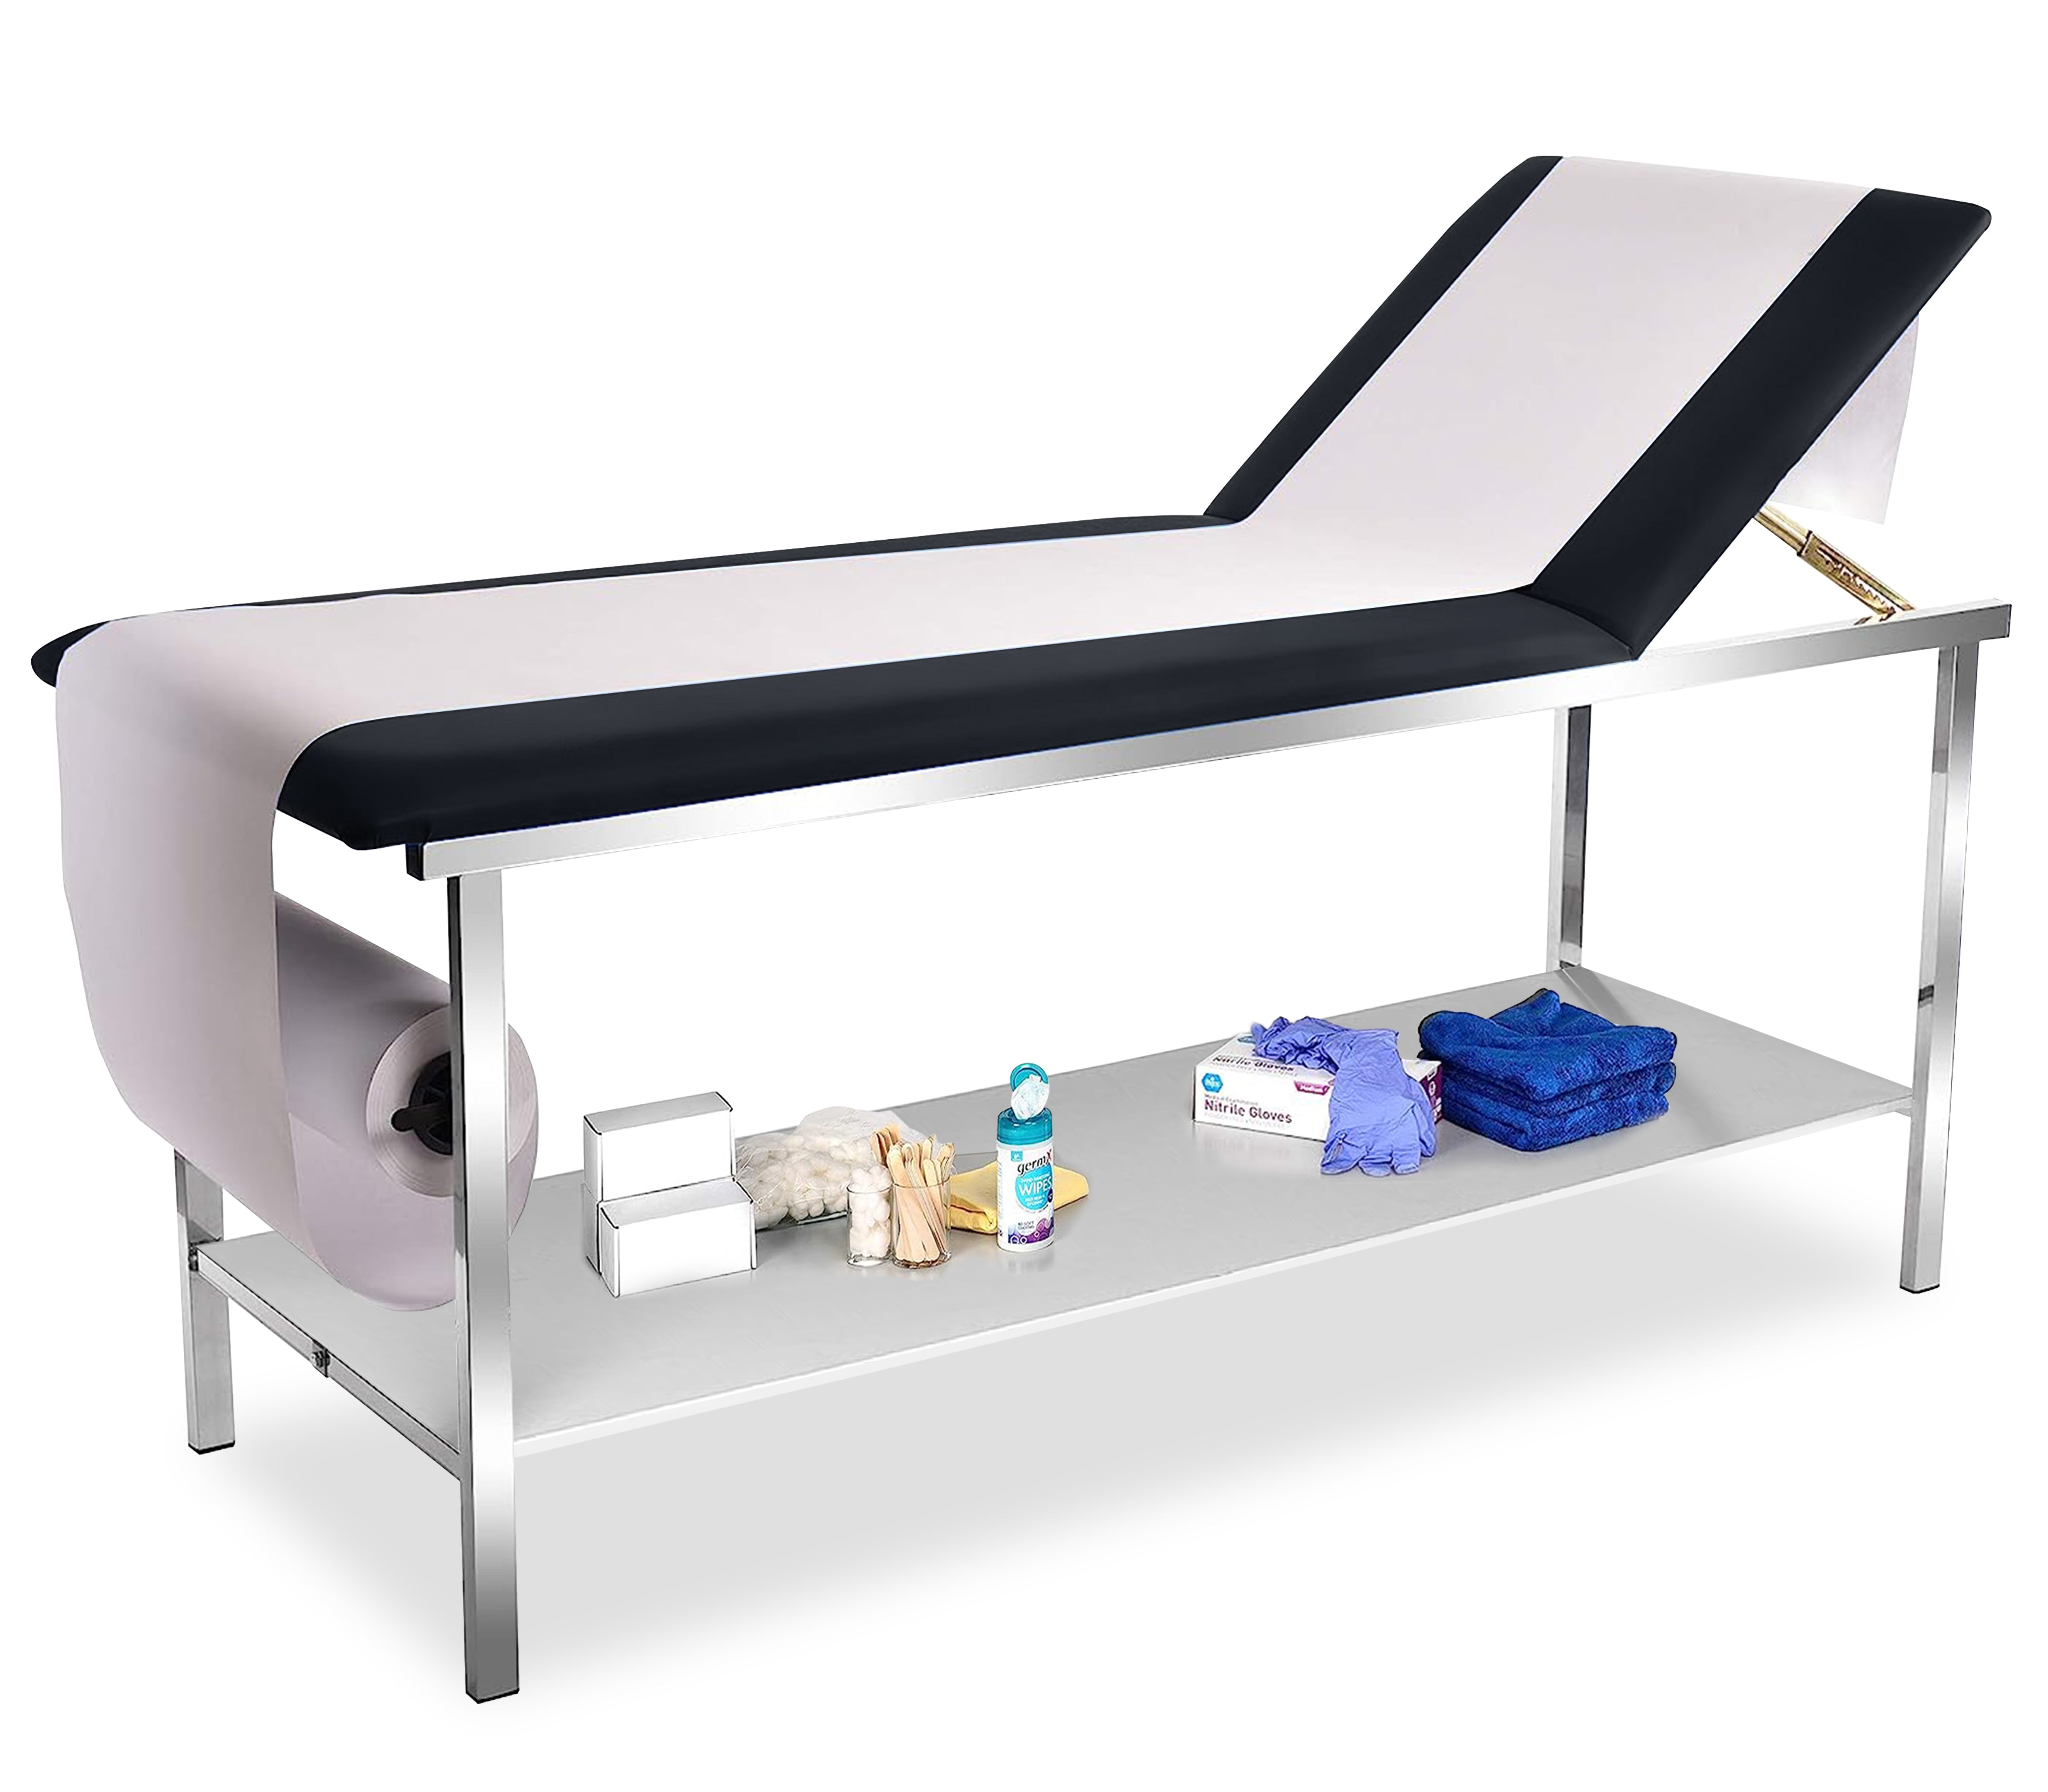 About Treatment Tables